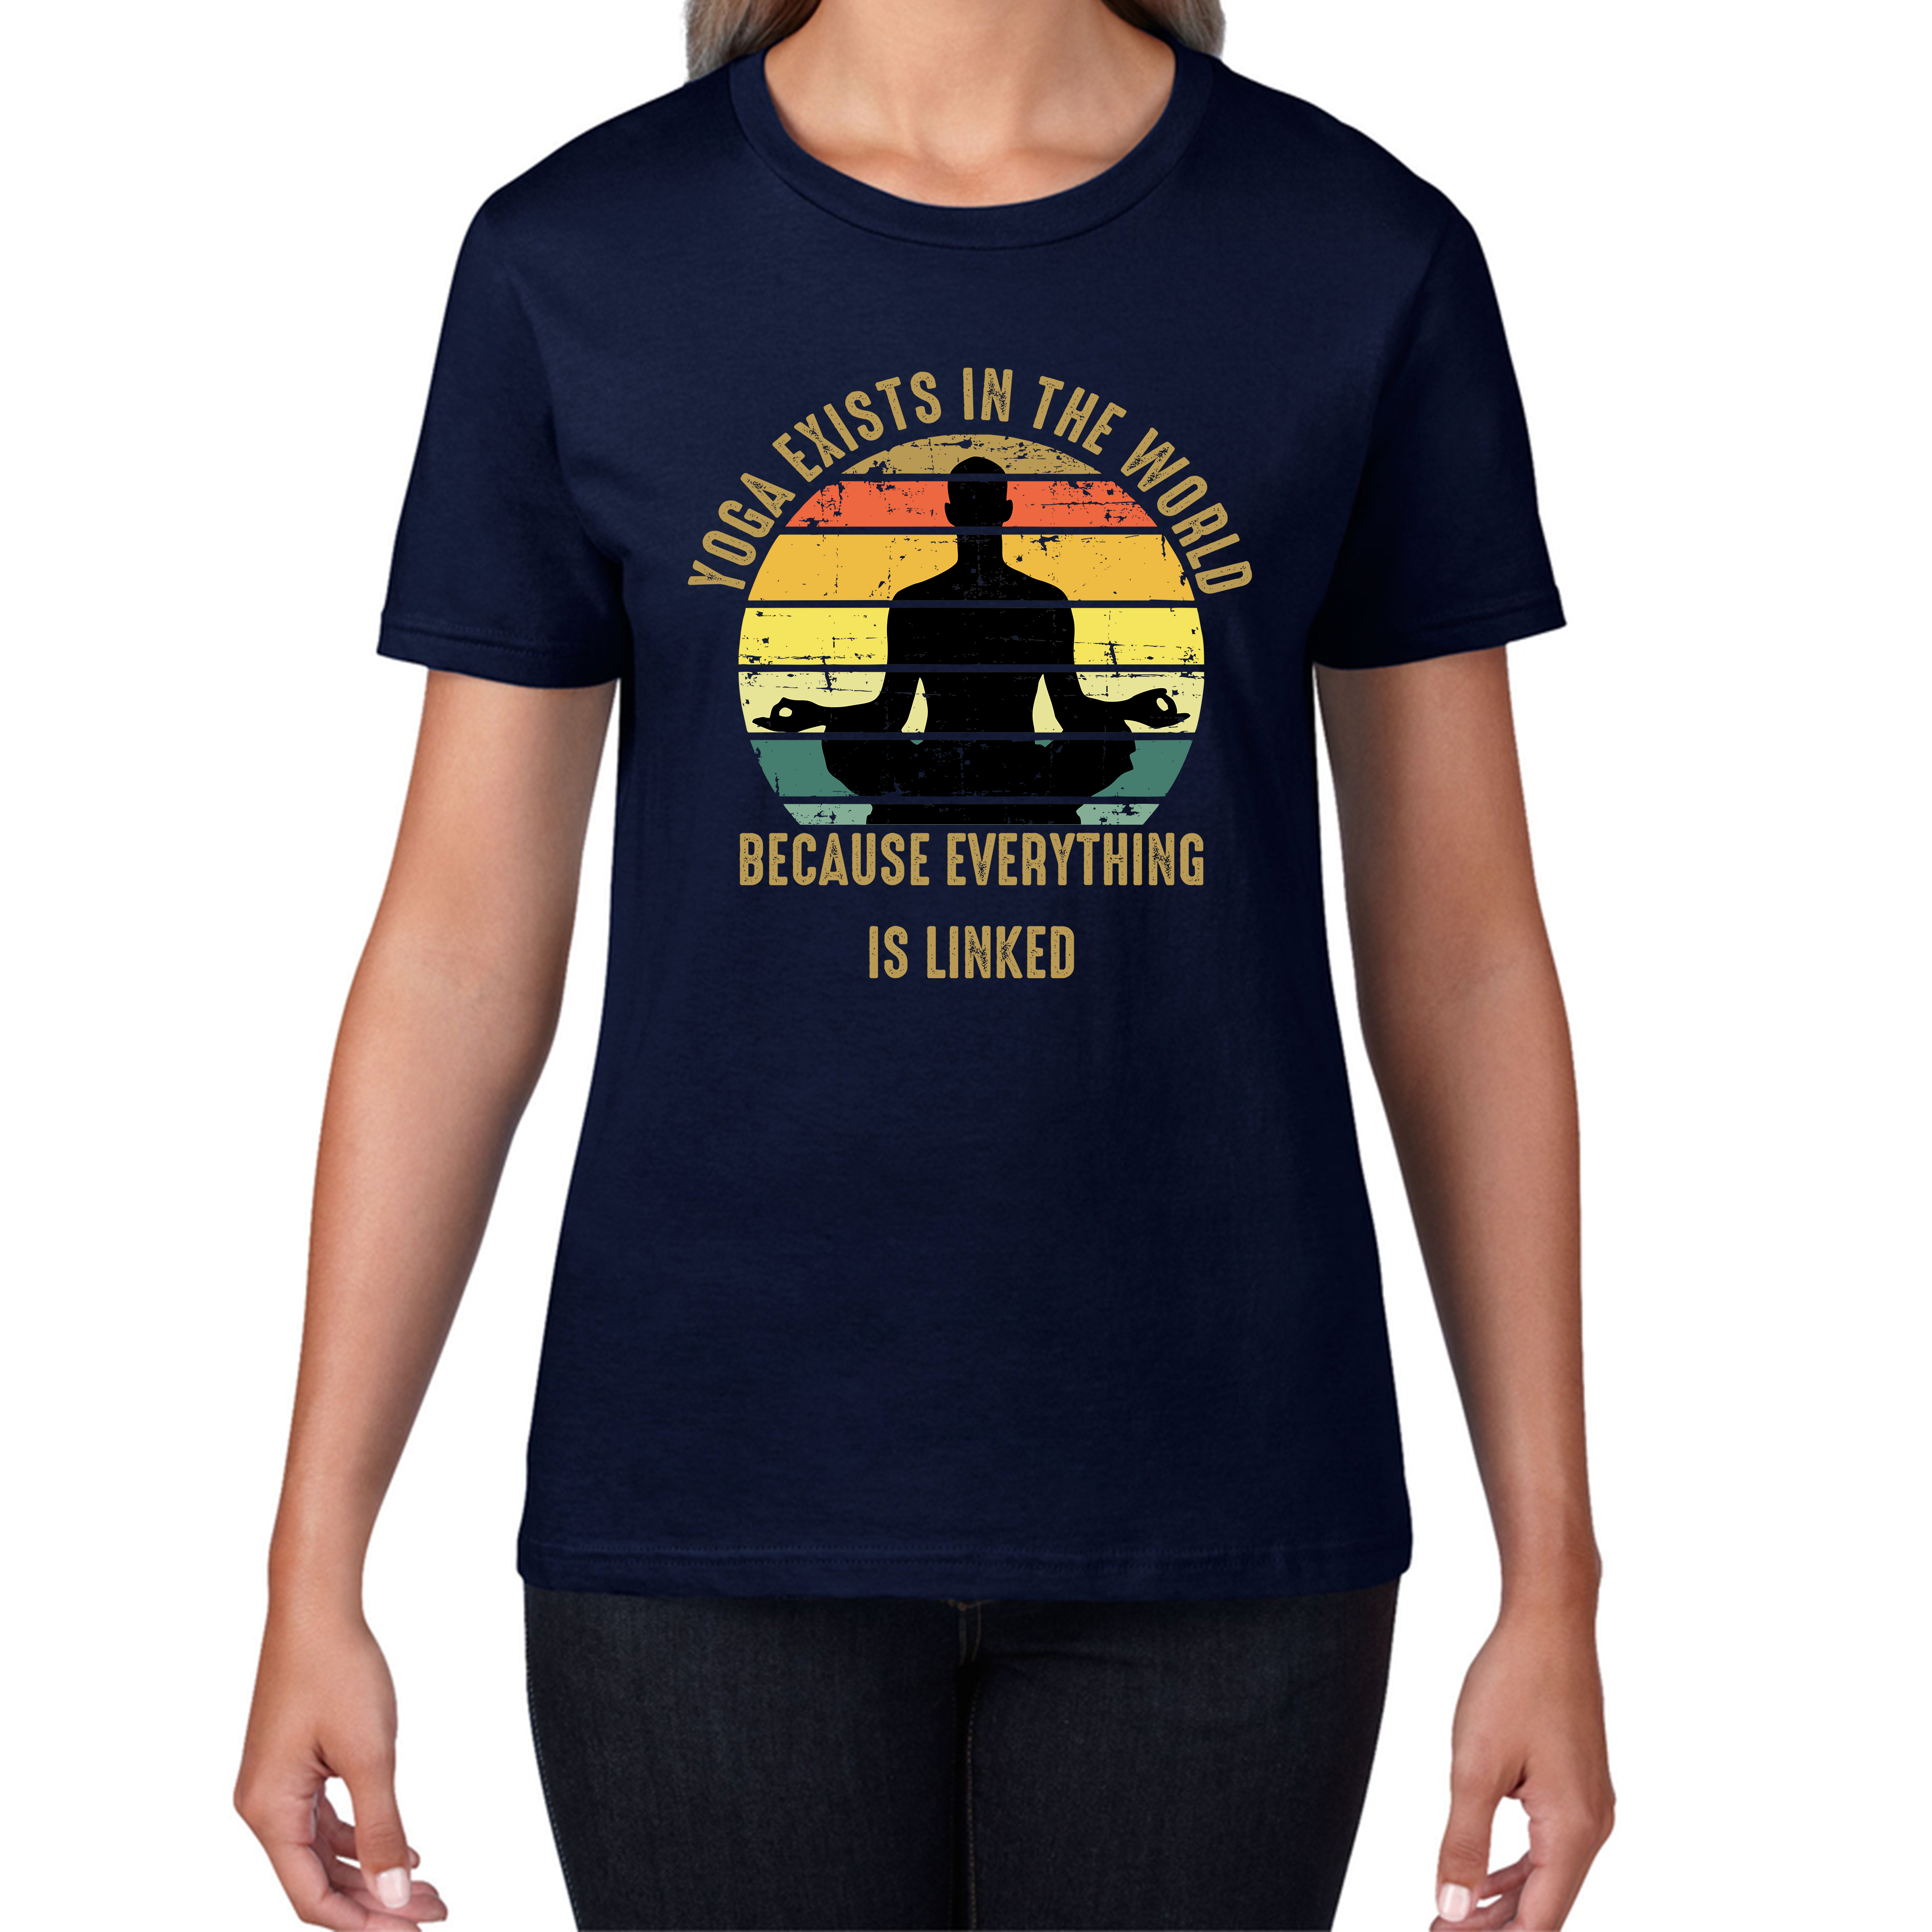 Yoga Exist In The World Because Everything Is Linked Vintage Exercise Lovers Womens Tee Top